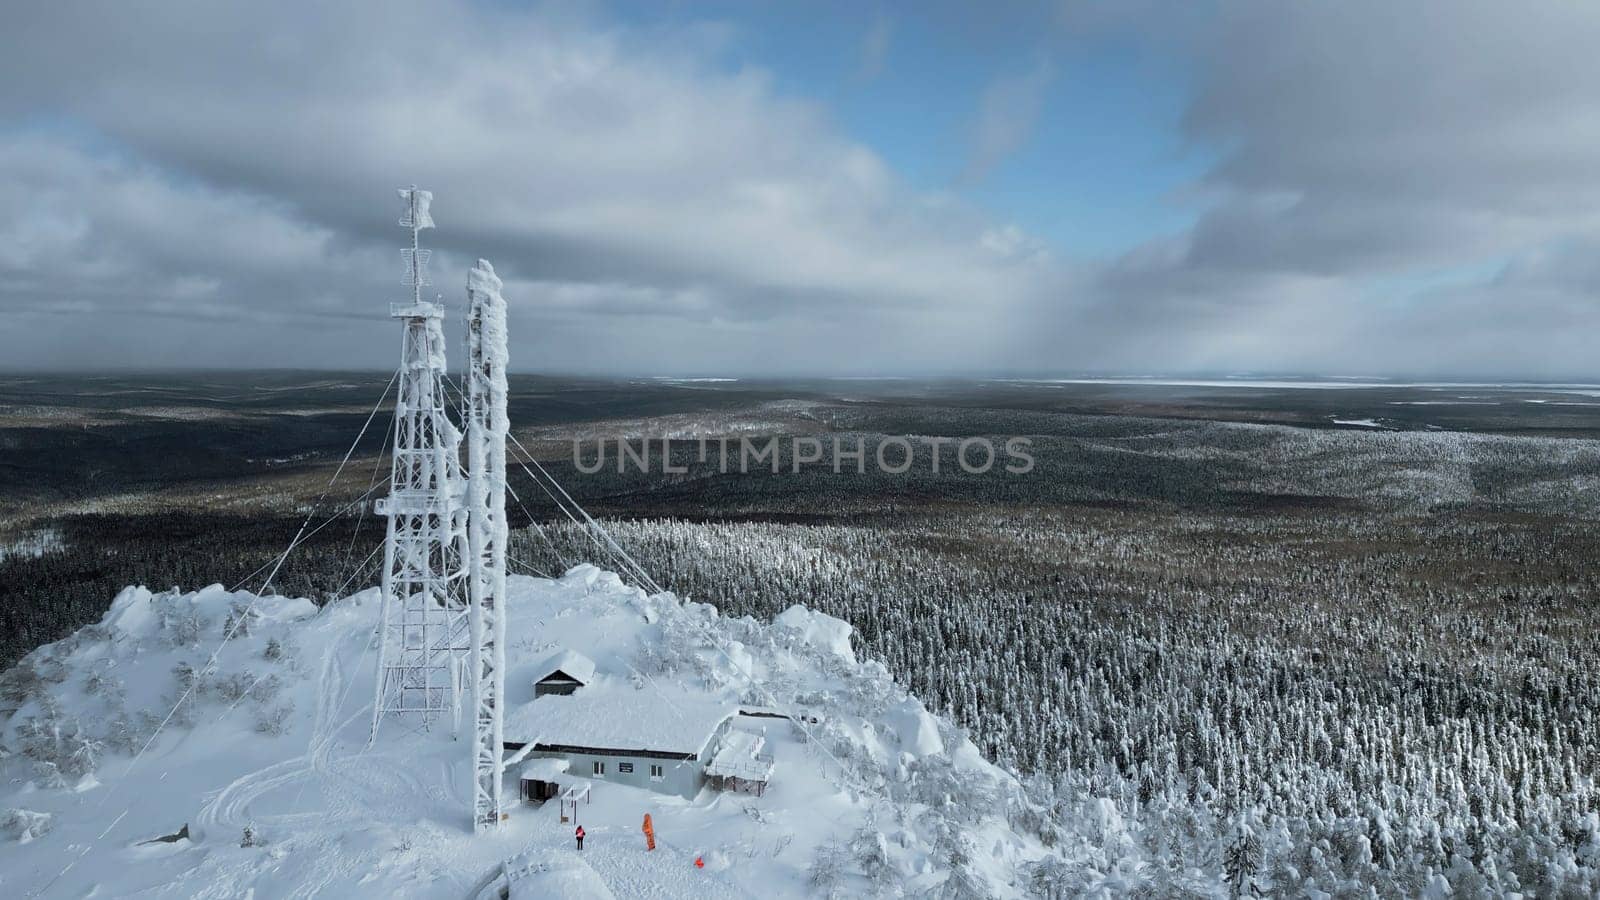 Frozen repeater antenna on the top of a hill in winter. Clip. Aerial view of winter valley panorama and blue cloudy sky